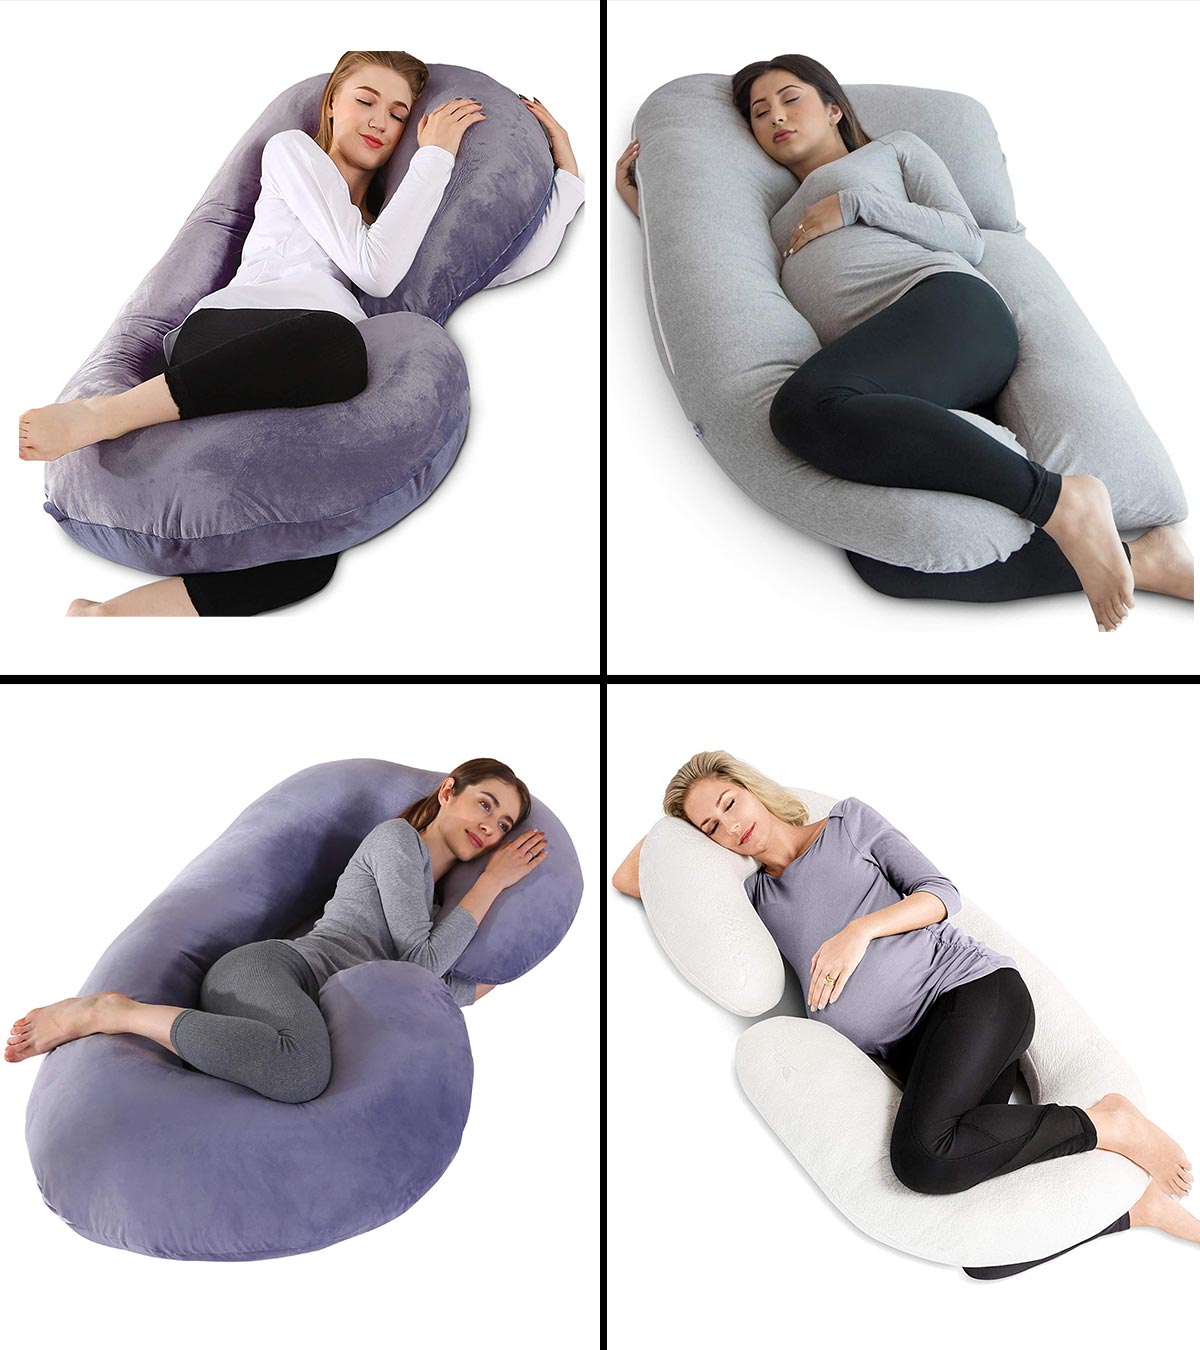 The 9 best pregnancy pillows of 2023, with expert tips